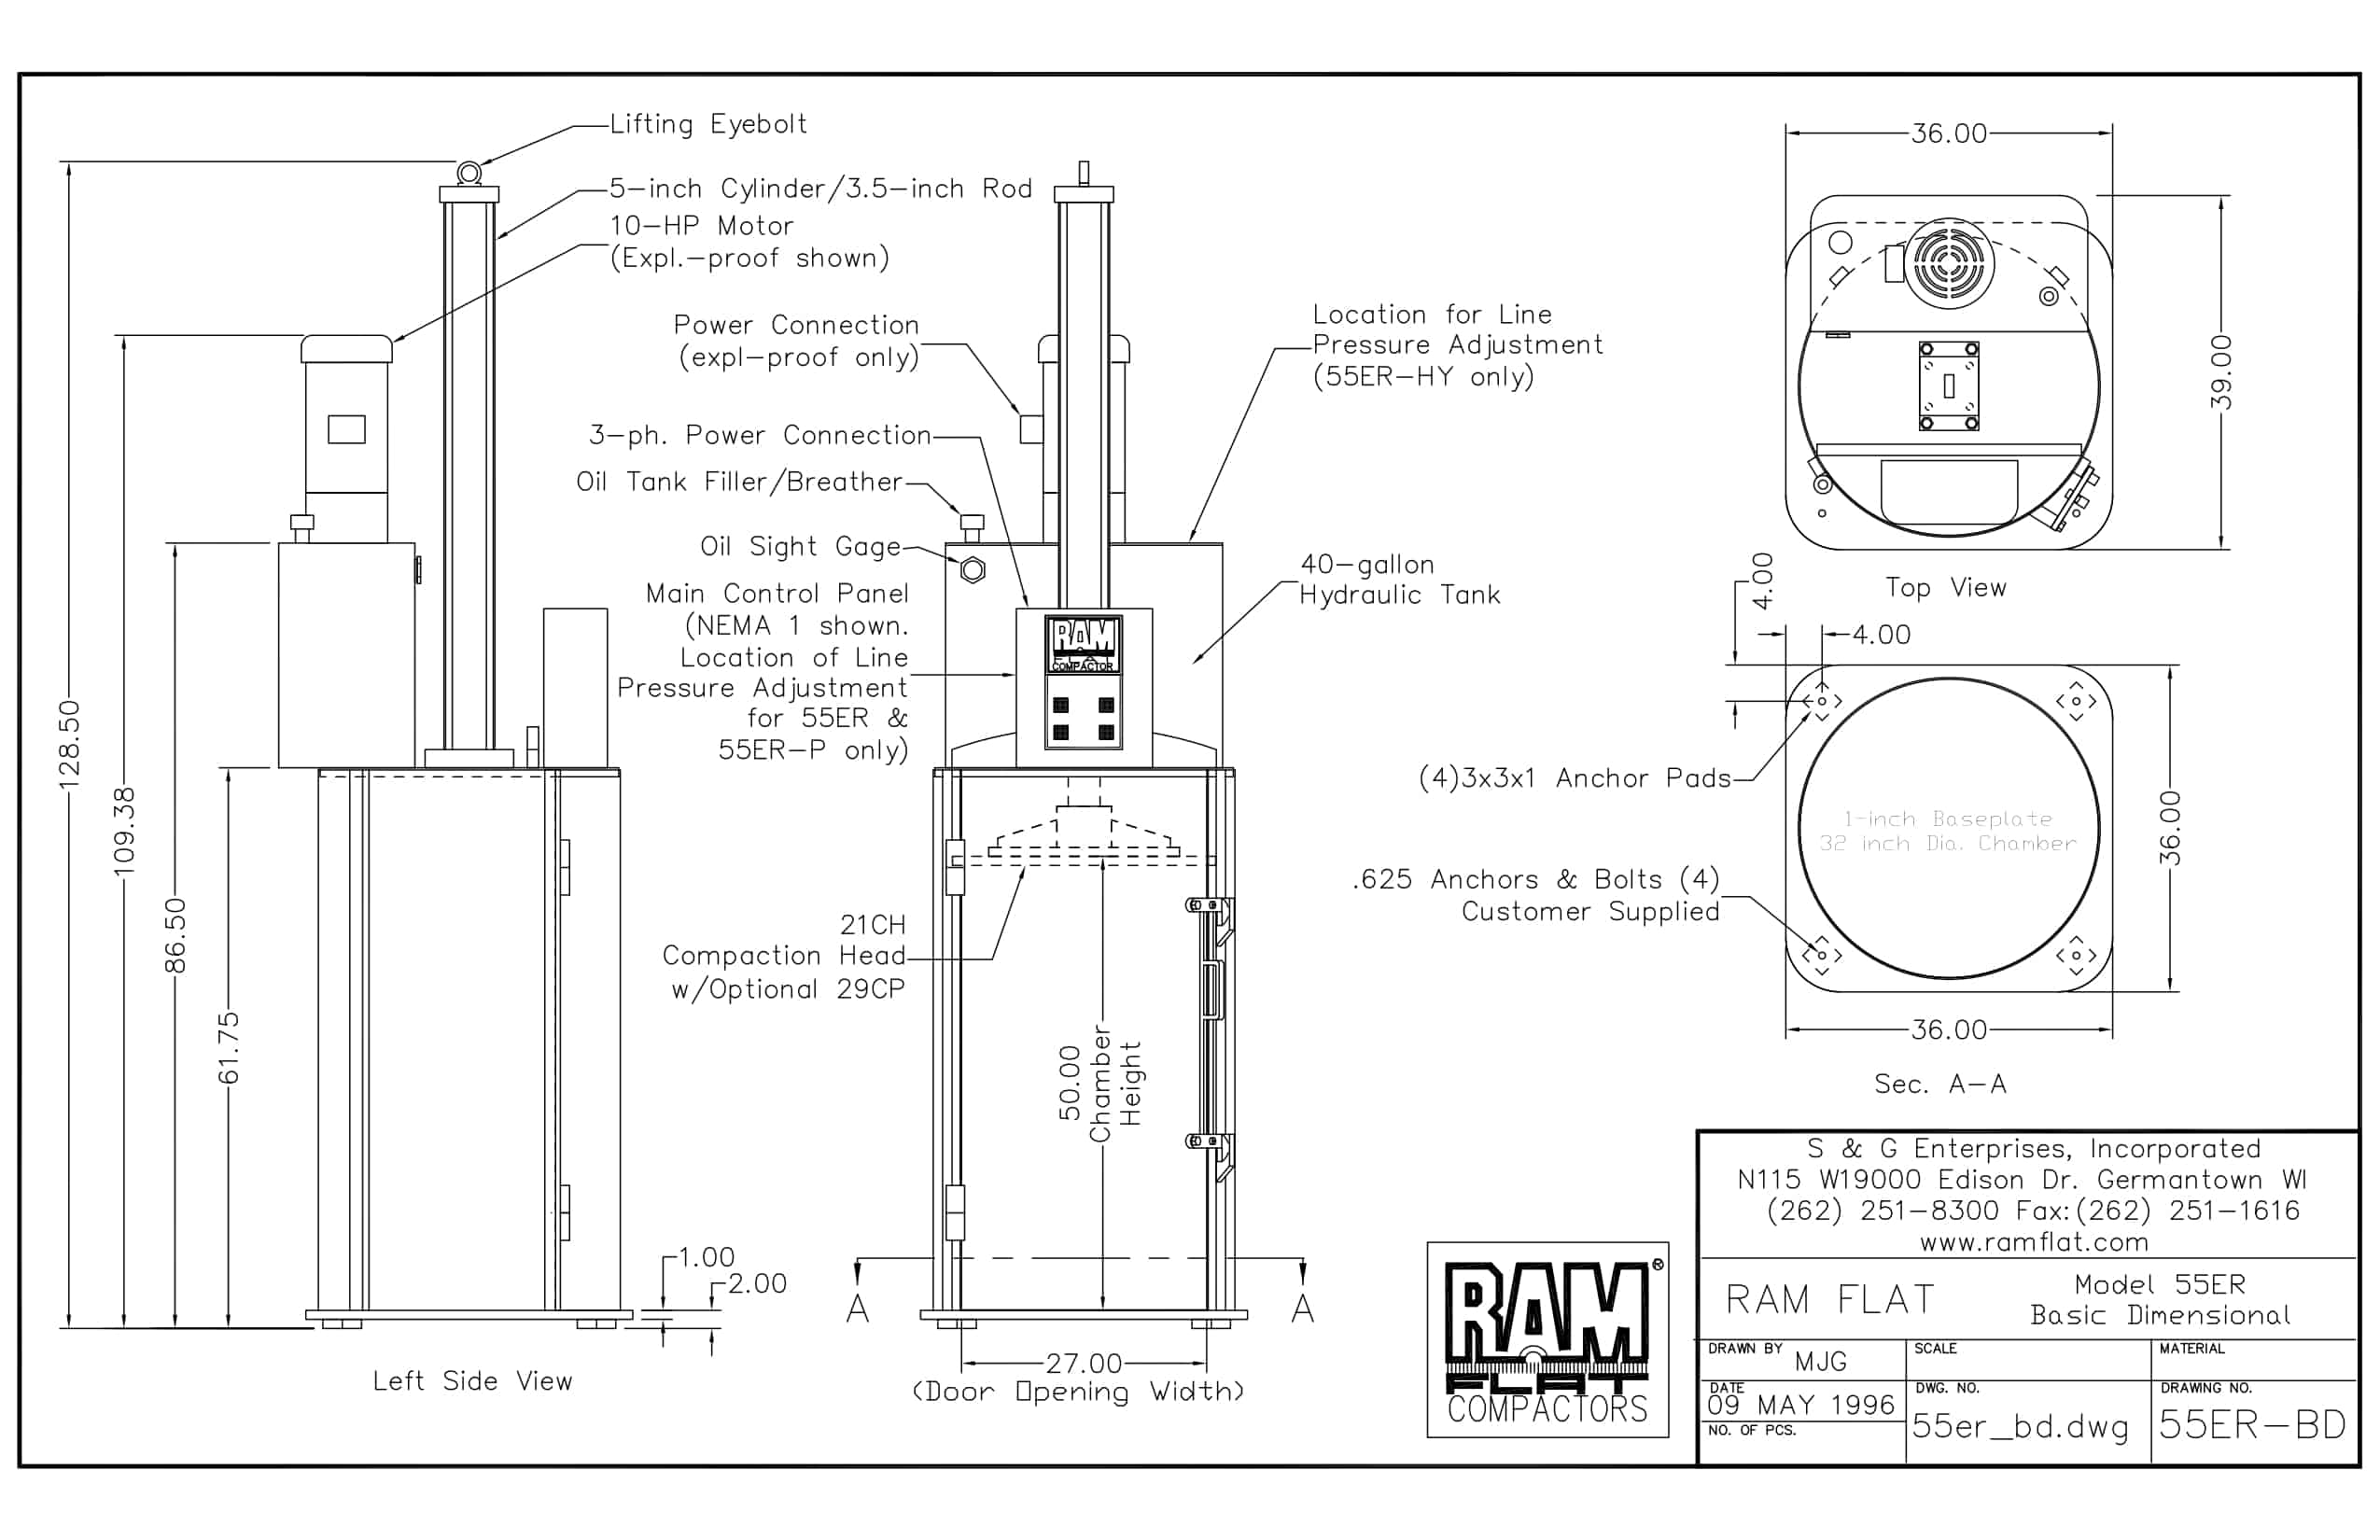 Schematic of RAM FLAT model for article about RAM FLAT Equipment Manuals, Schematics & Complete Parts Lists Picture of Free Application Engineering to illustrate the blog post titled Free Application Engineering for Your Drum Crushing and Drum Compacting Needs